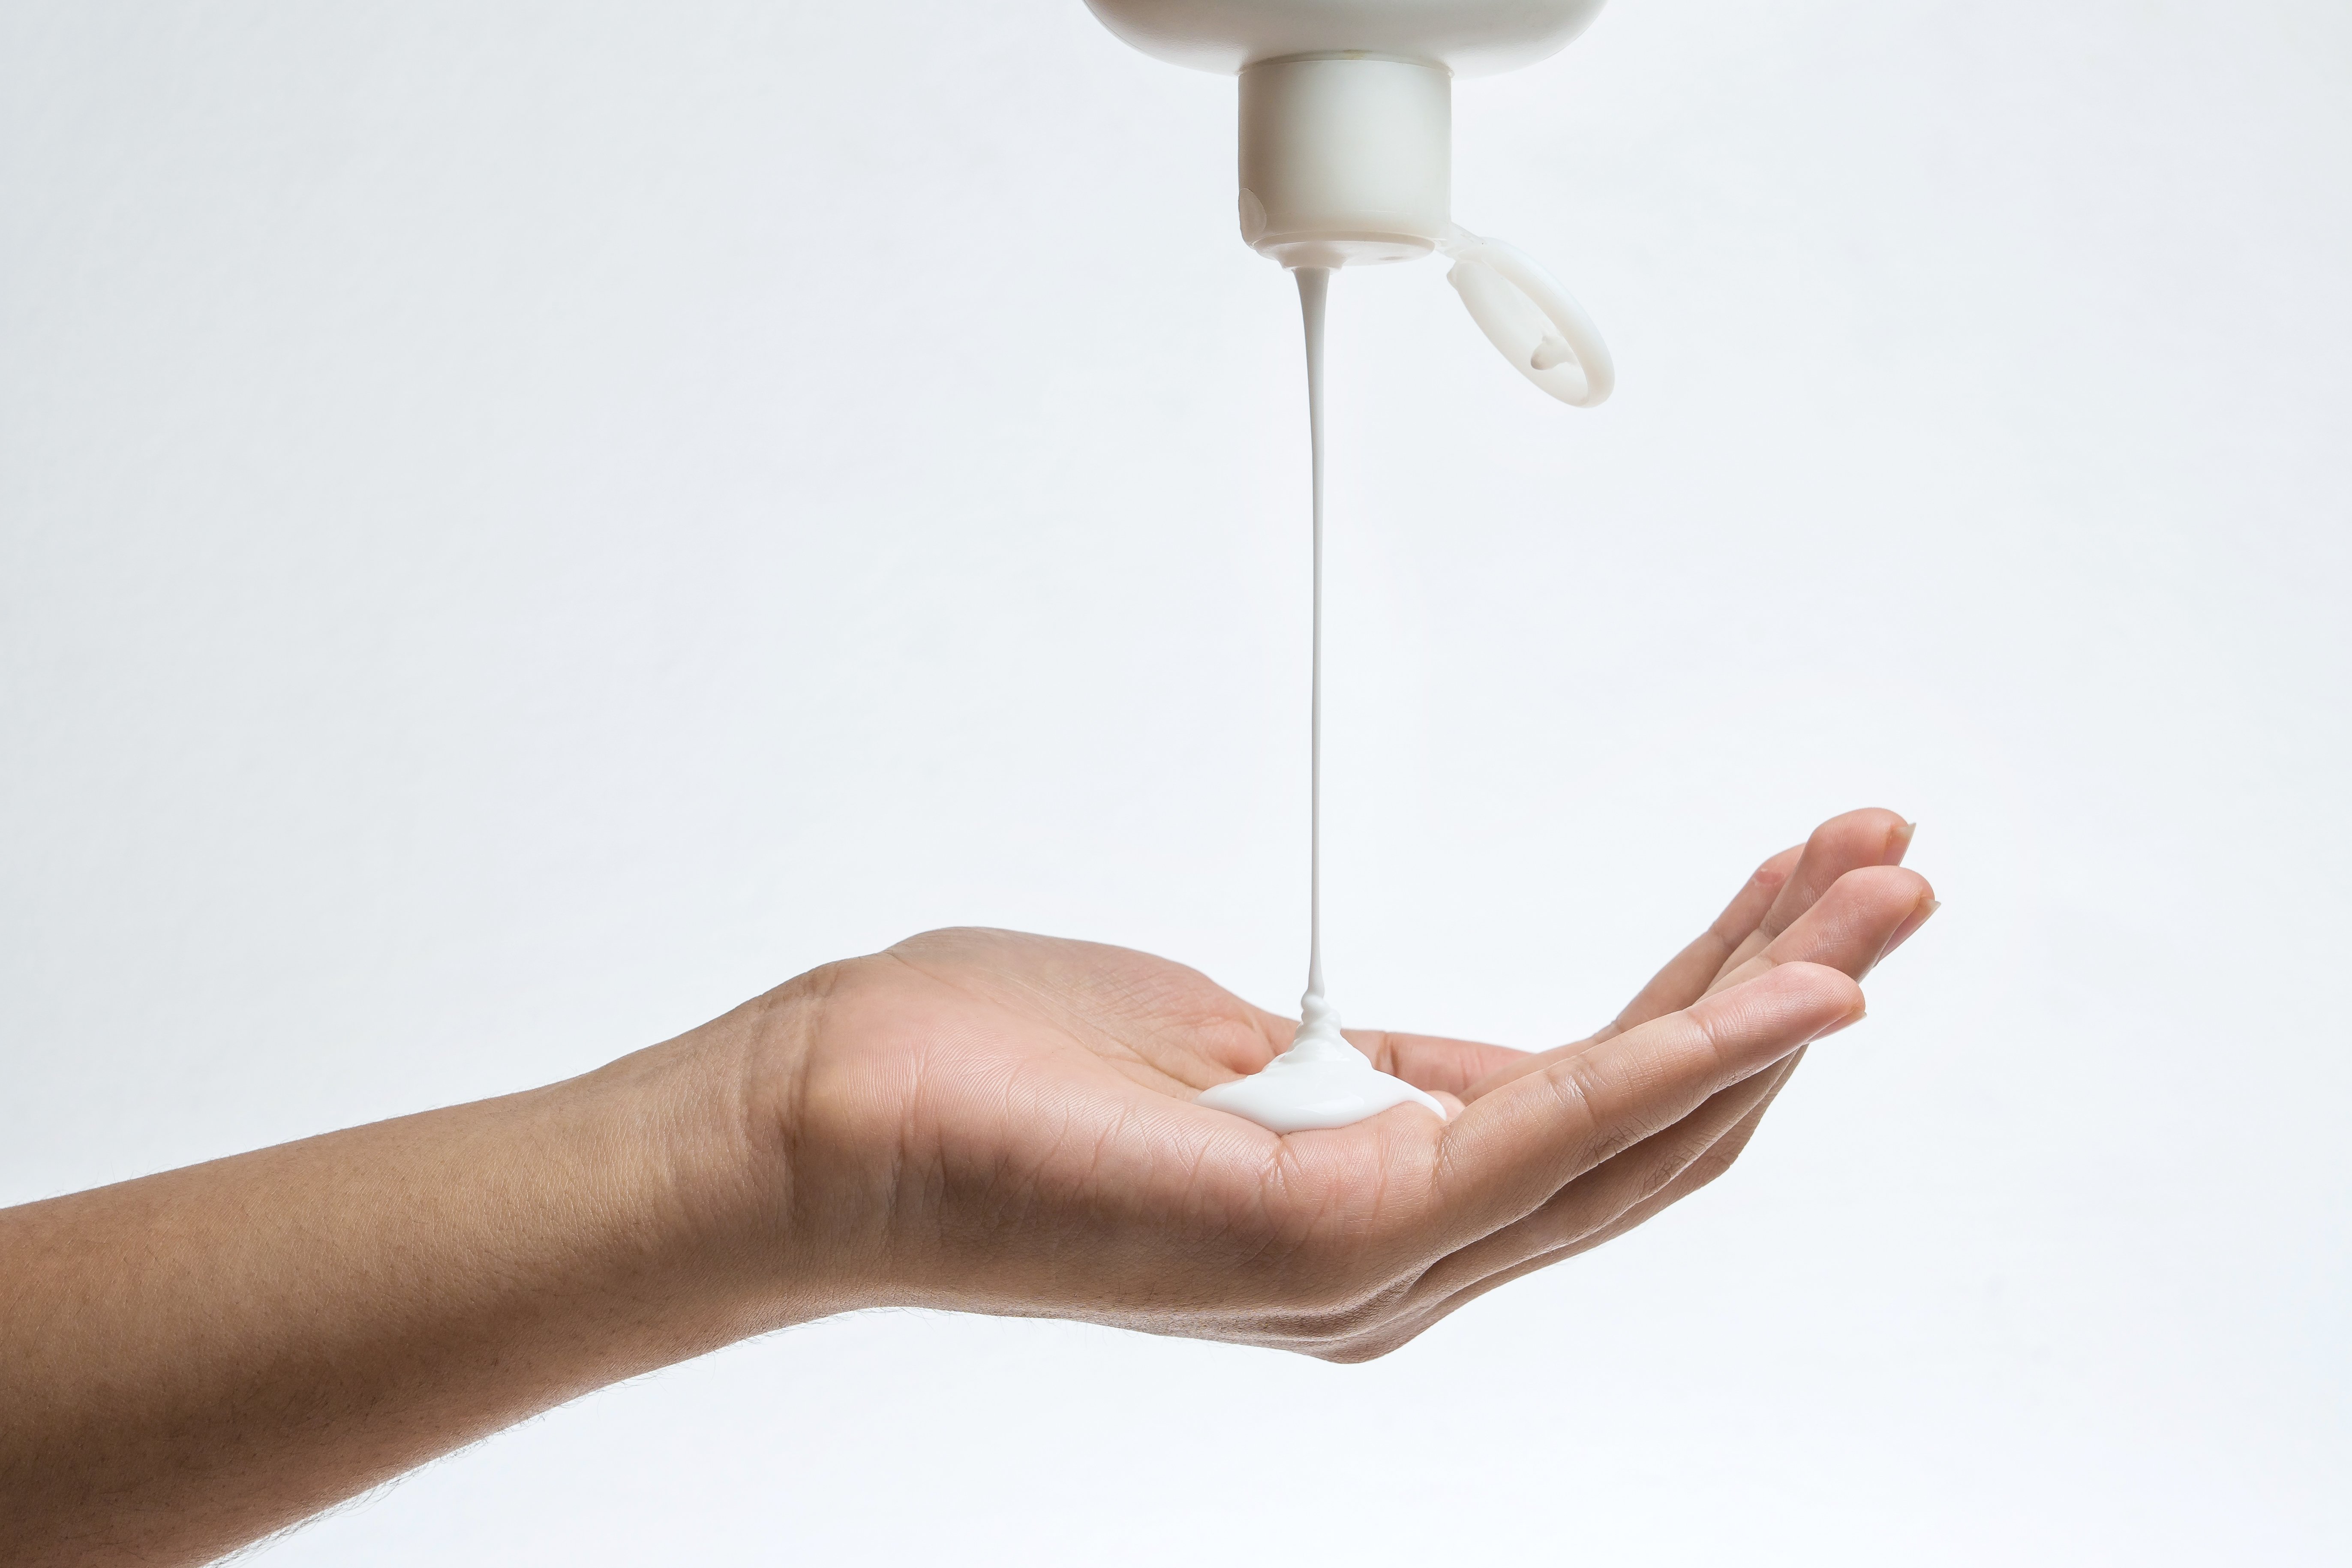 A photo of a hand pouring out body lotion | Source: Shutterstock